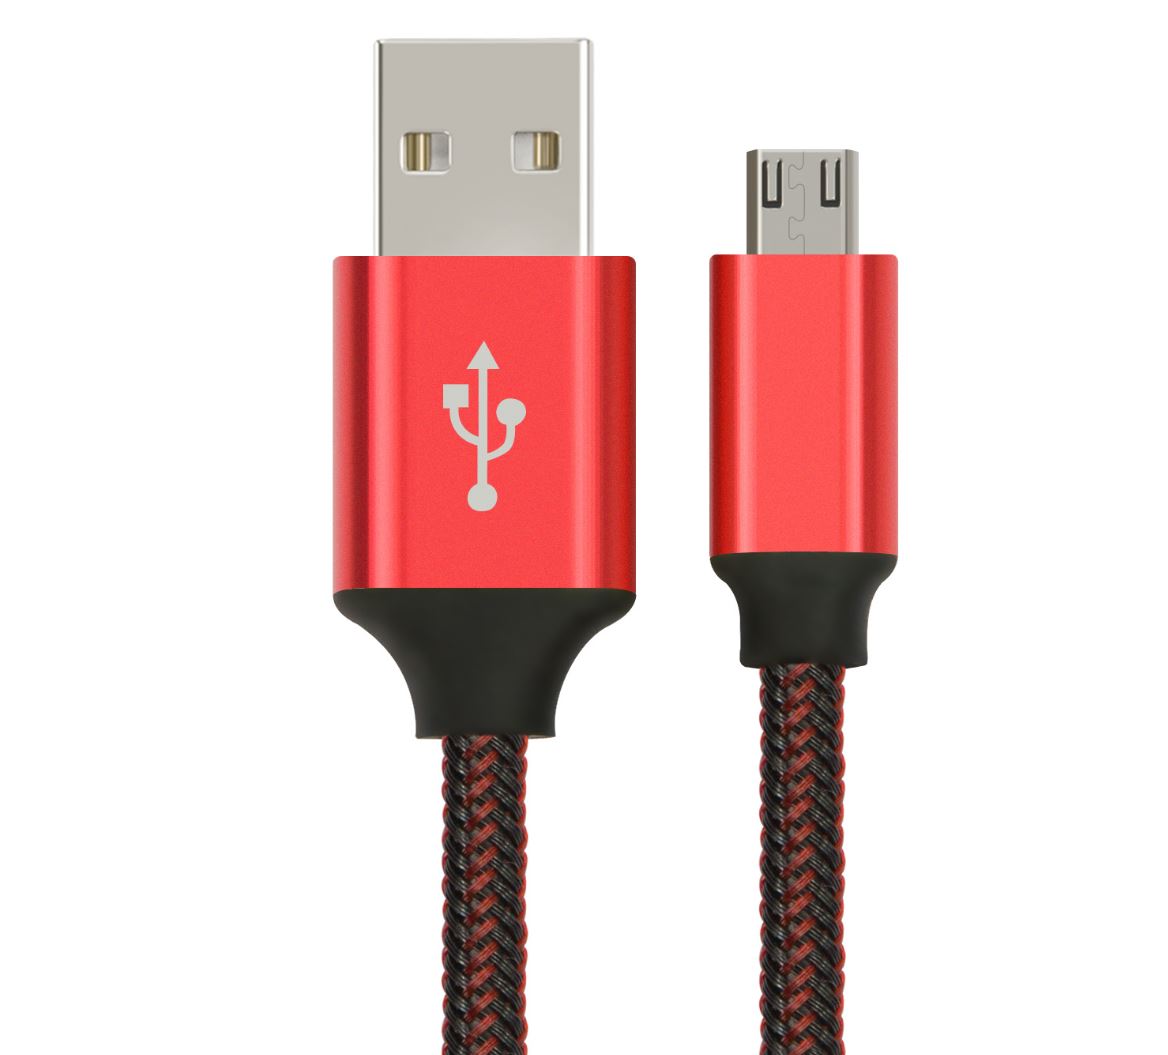 Astrotek 2m Micro USB Data Sync Charger Cable Cord Red Color for Samsung HTC Motorola Nokia Kndle Android Phone Tablet  Devices